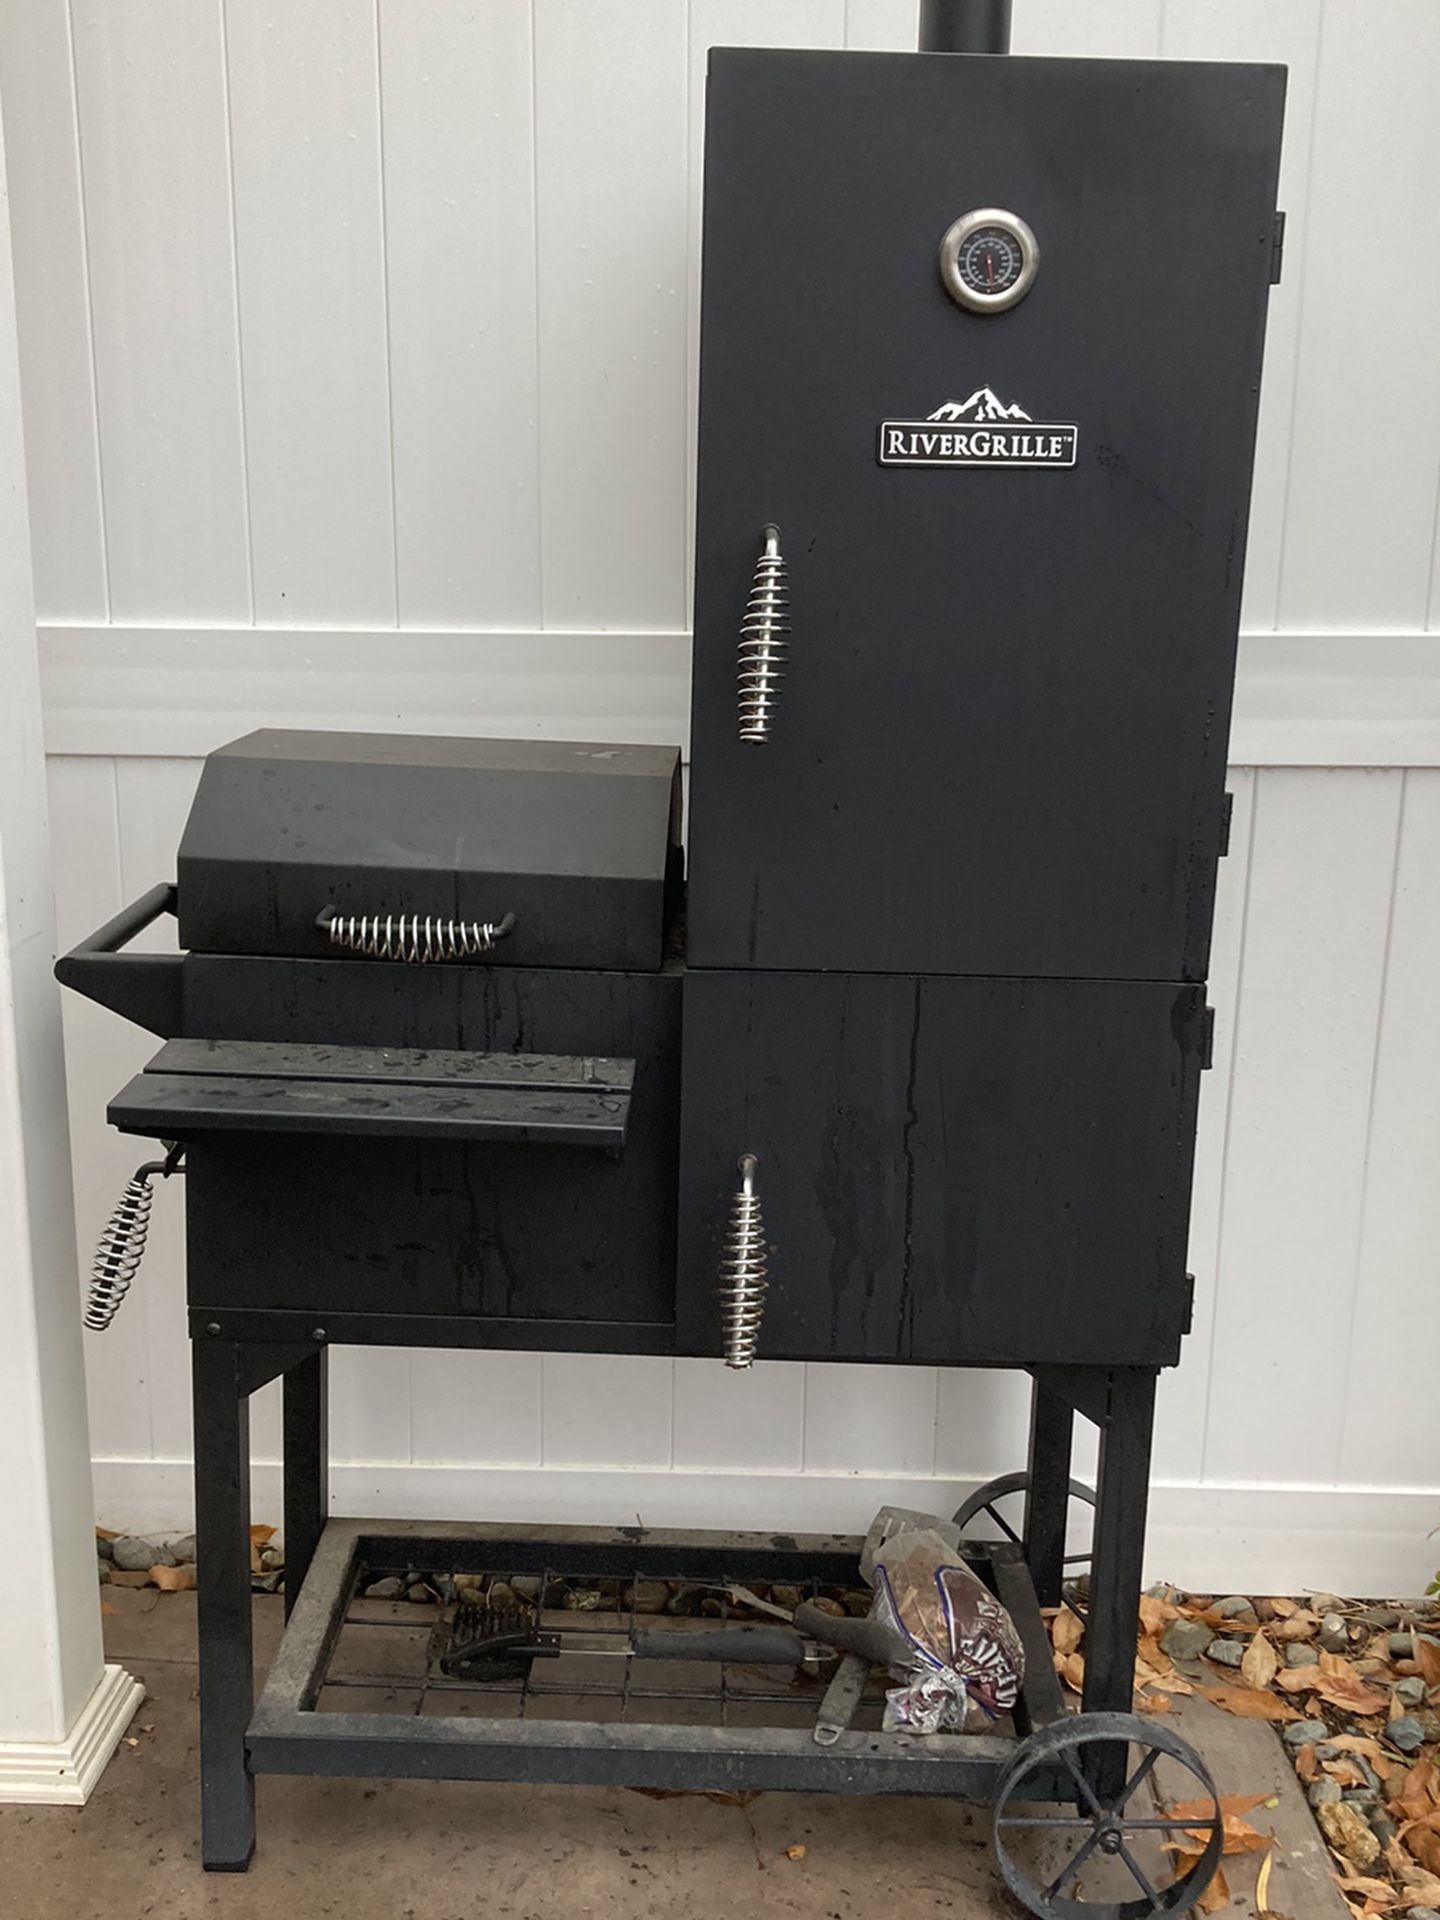 River Grille Smoker